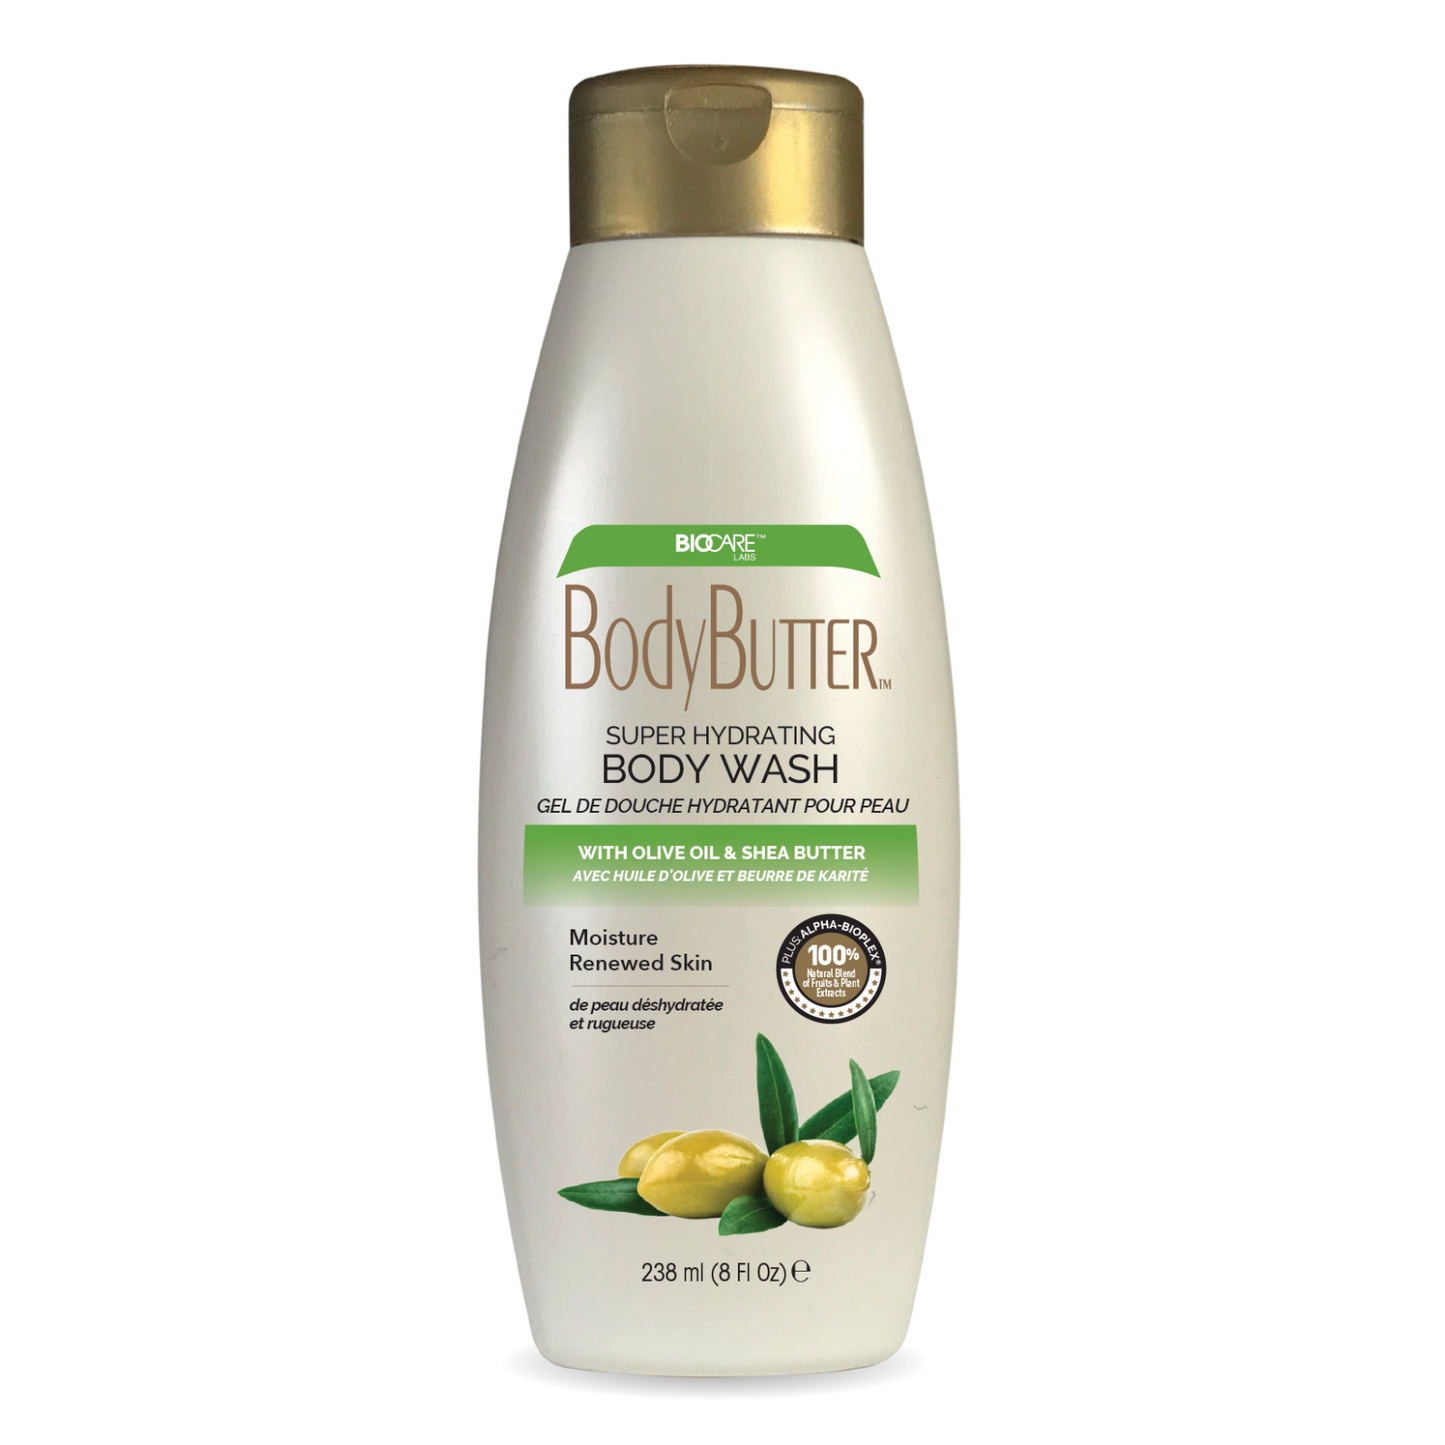 SUPER HYDRATING BODY WASH with OLIVE OIL & SHEA BUTTER